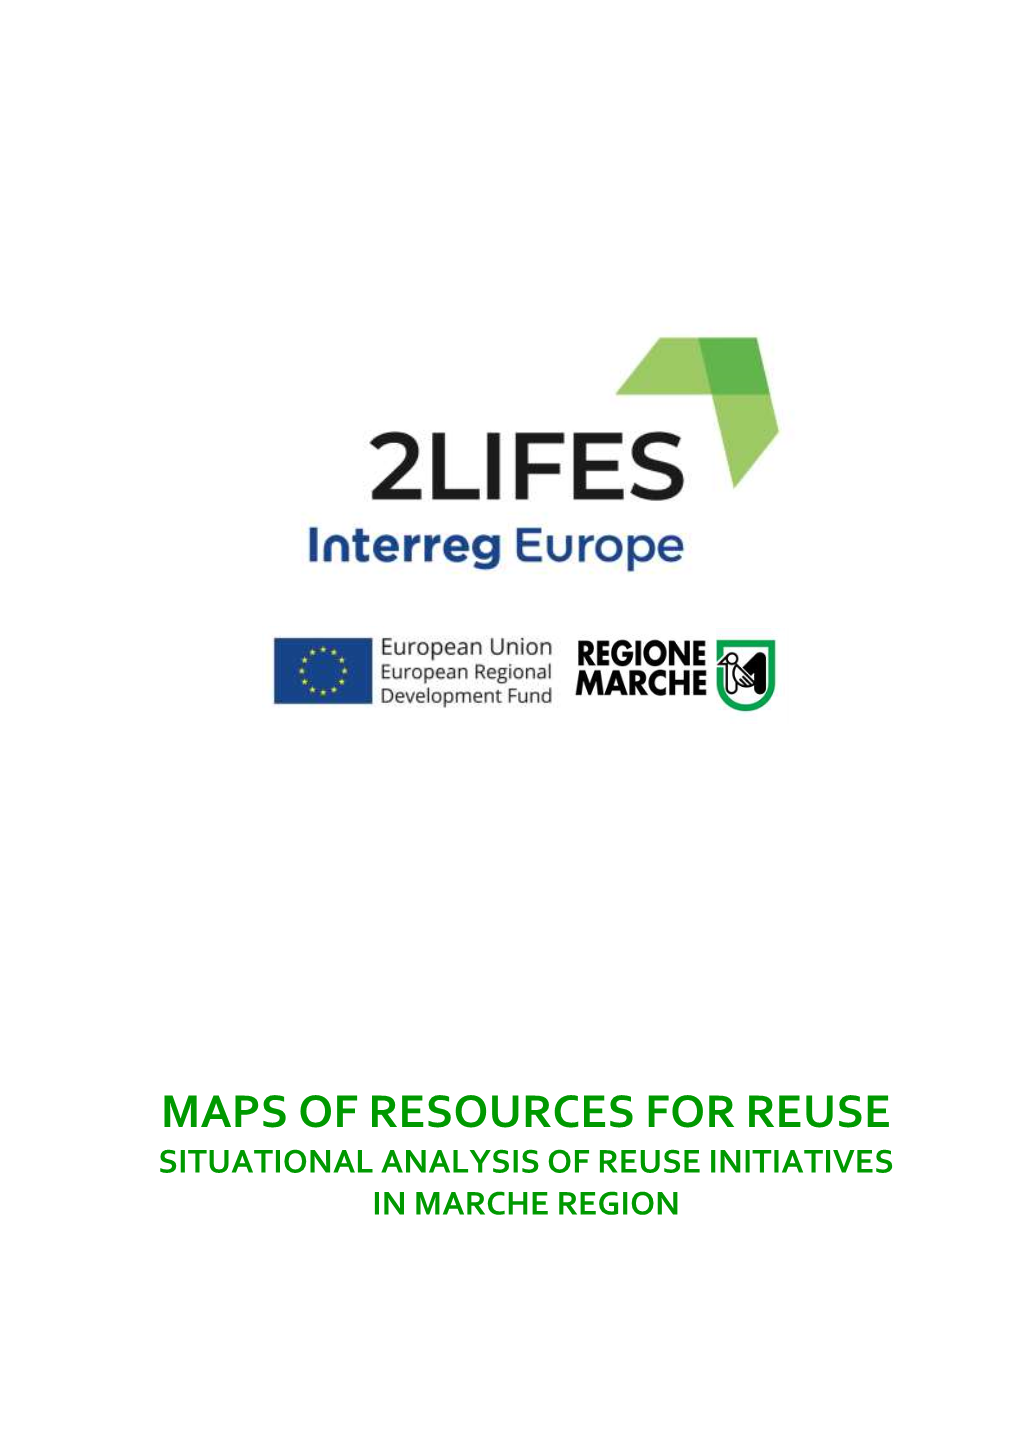 Situational Analysis of Reuse Initiatives in Marche Region